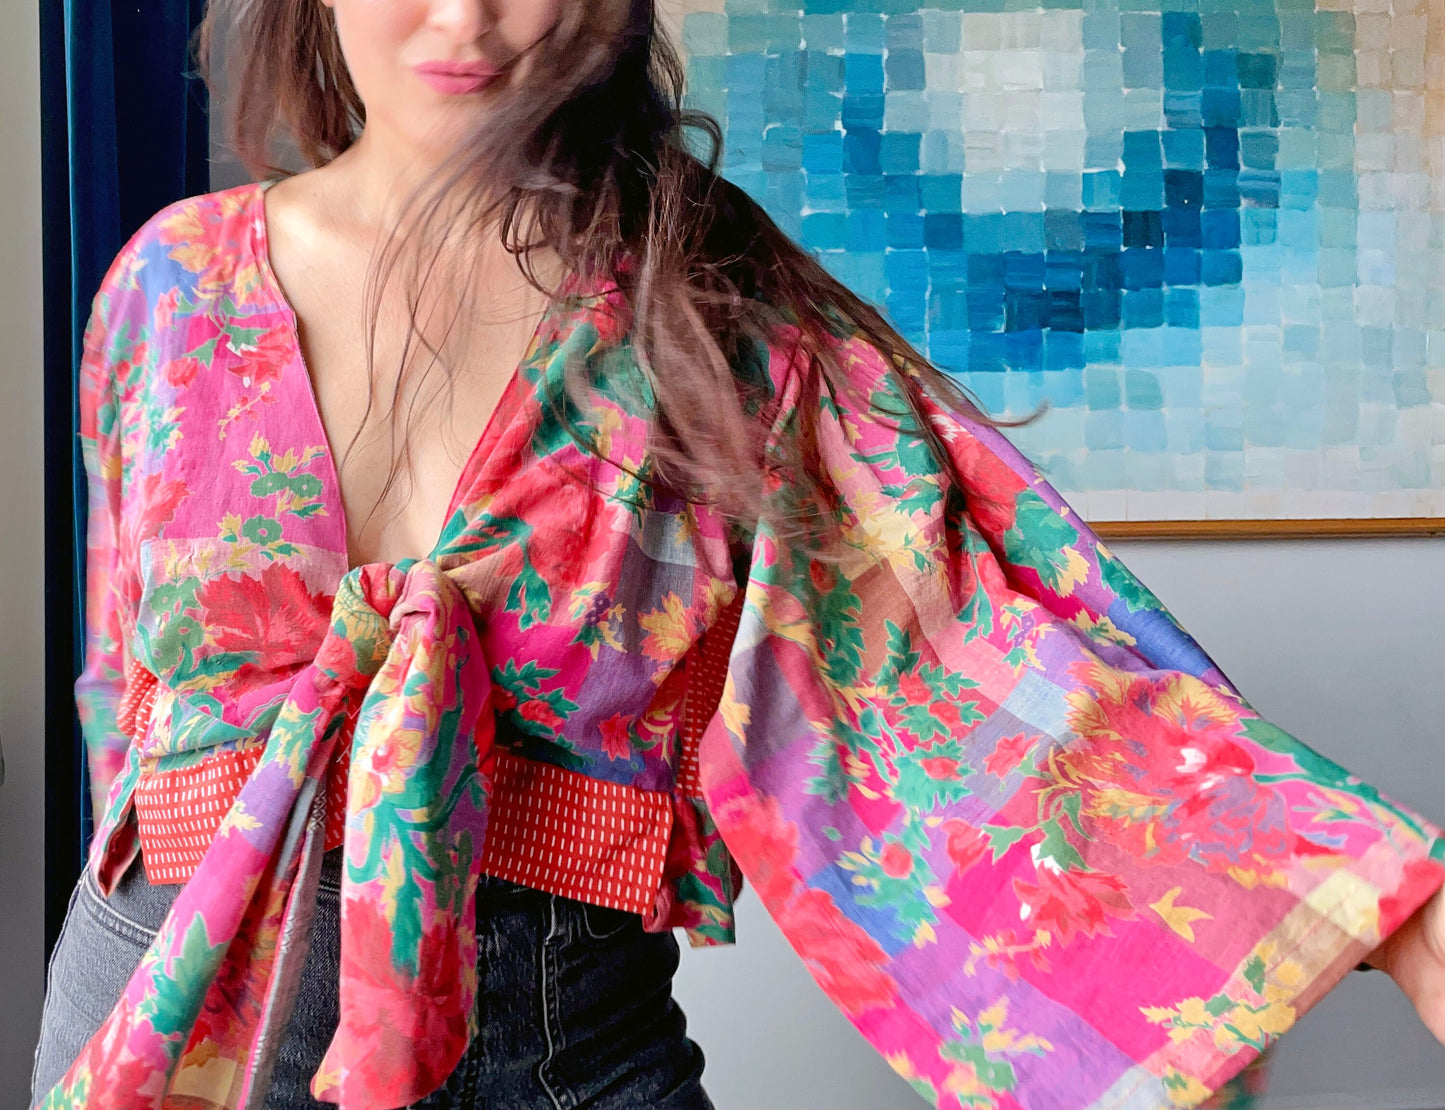 Fun Florals Recycled Fabrics Tie Top Jacket - One size - reclaimed vintage fabrics